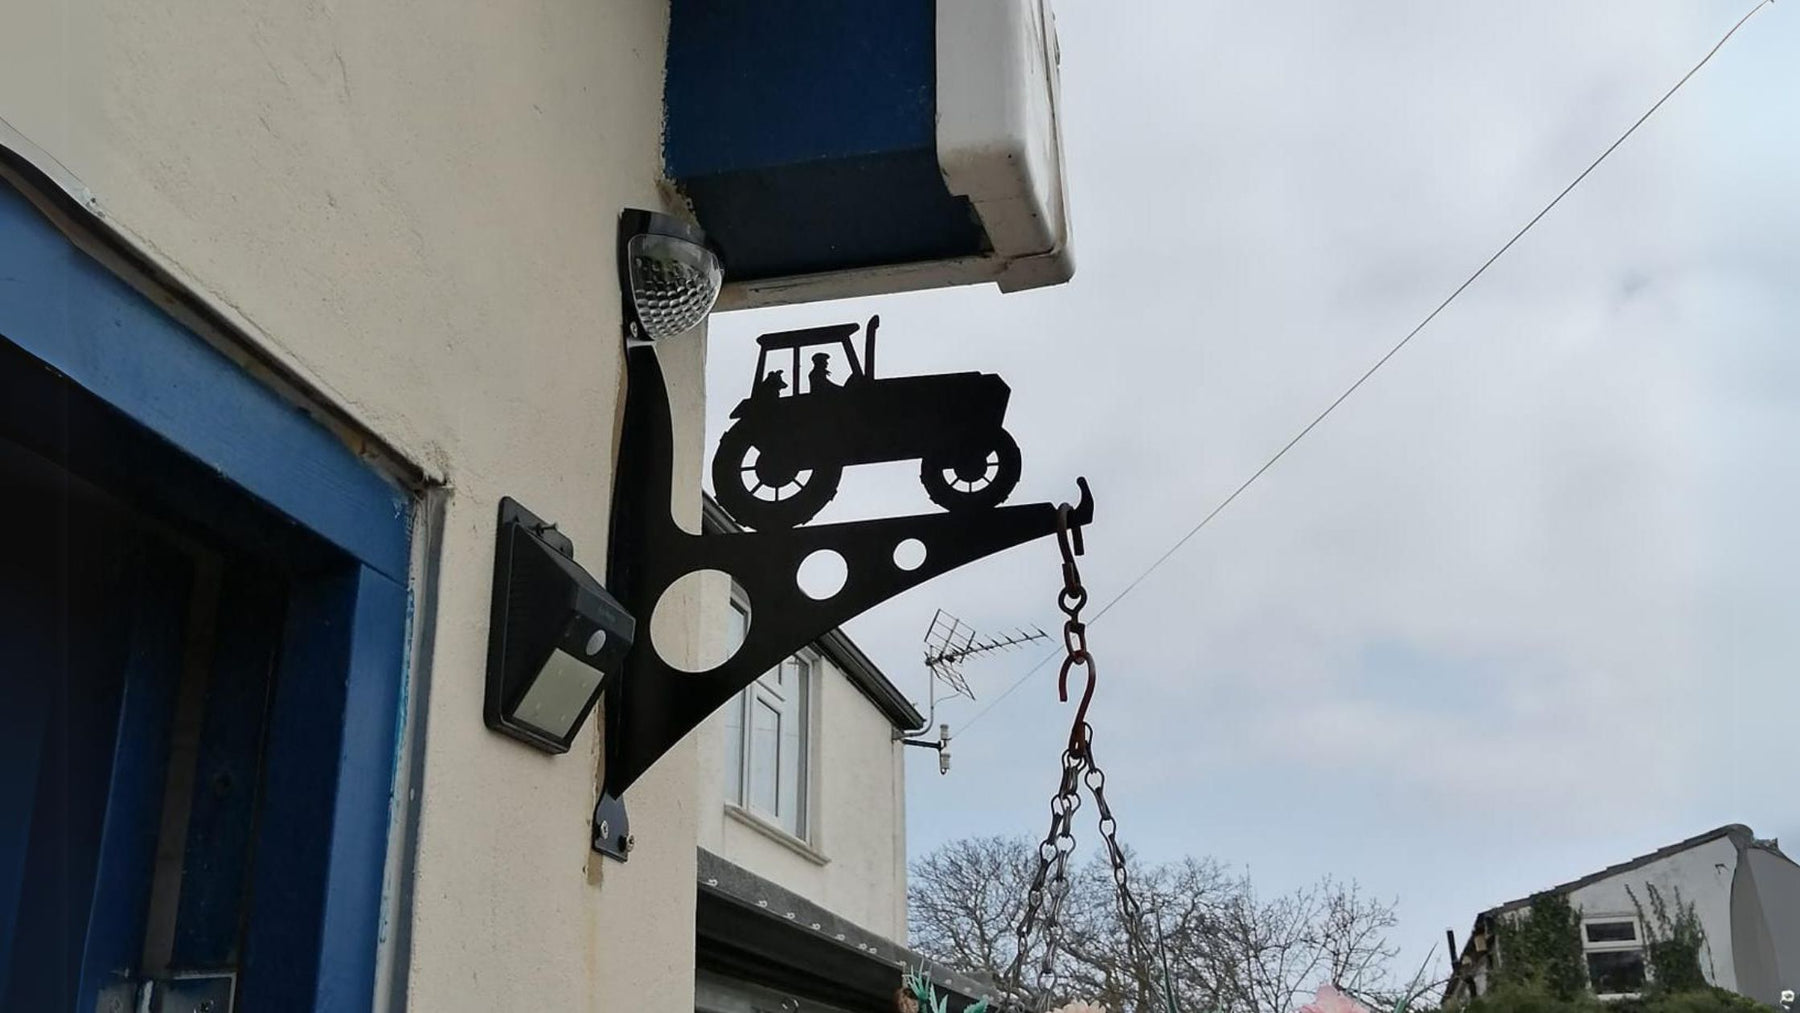 8 Ways To Make The Most Out Of Your Hanging Basket Bracket All Year Round!